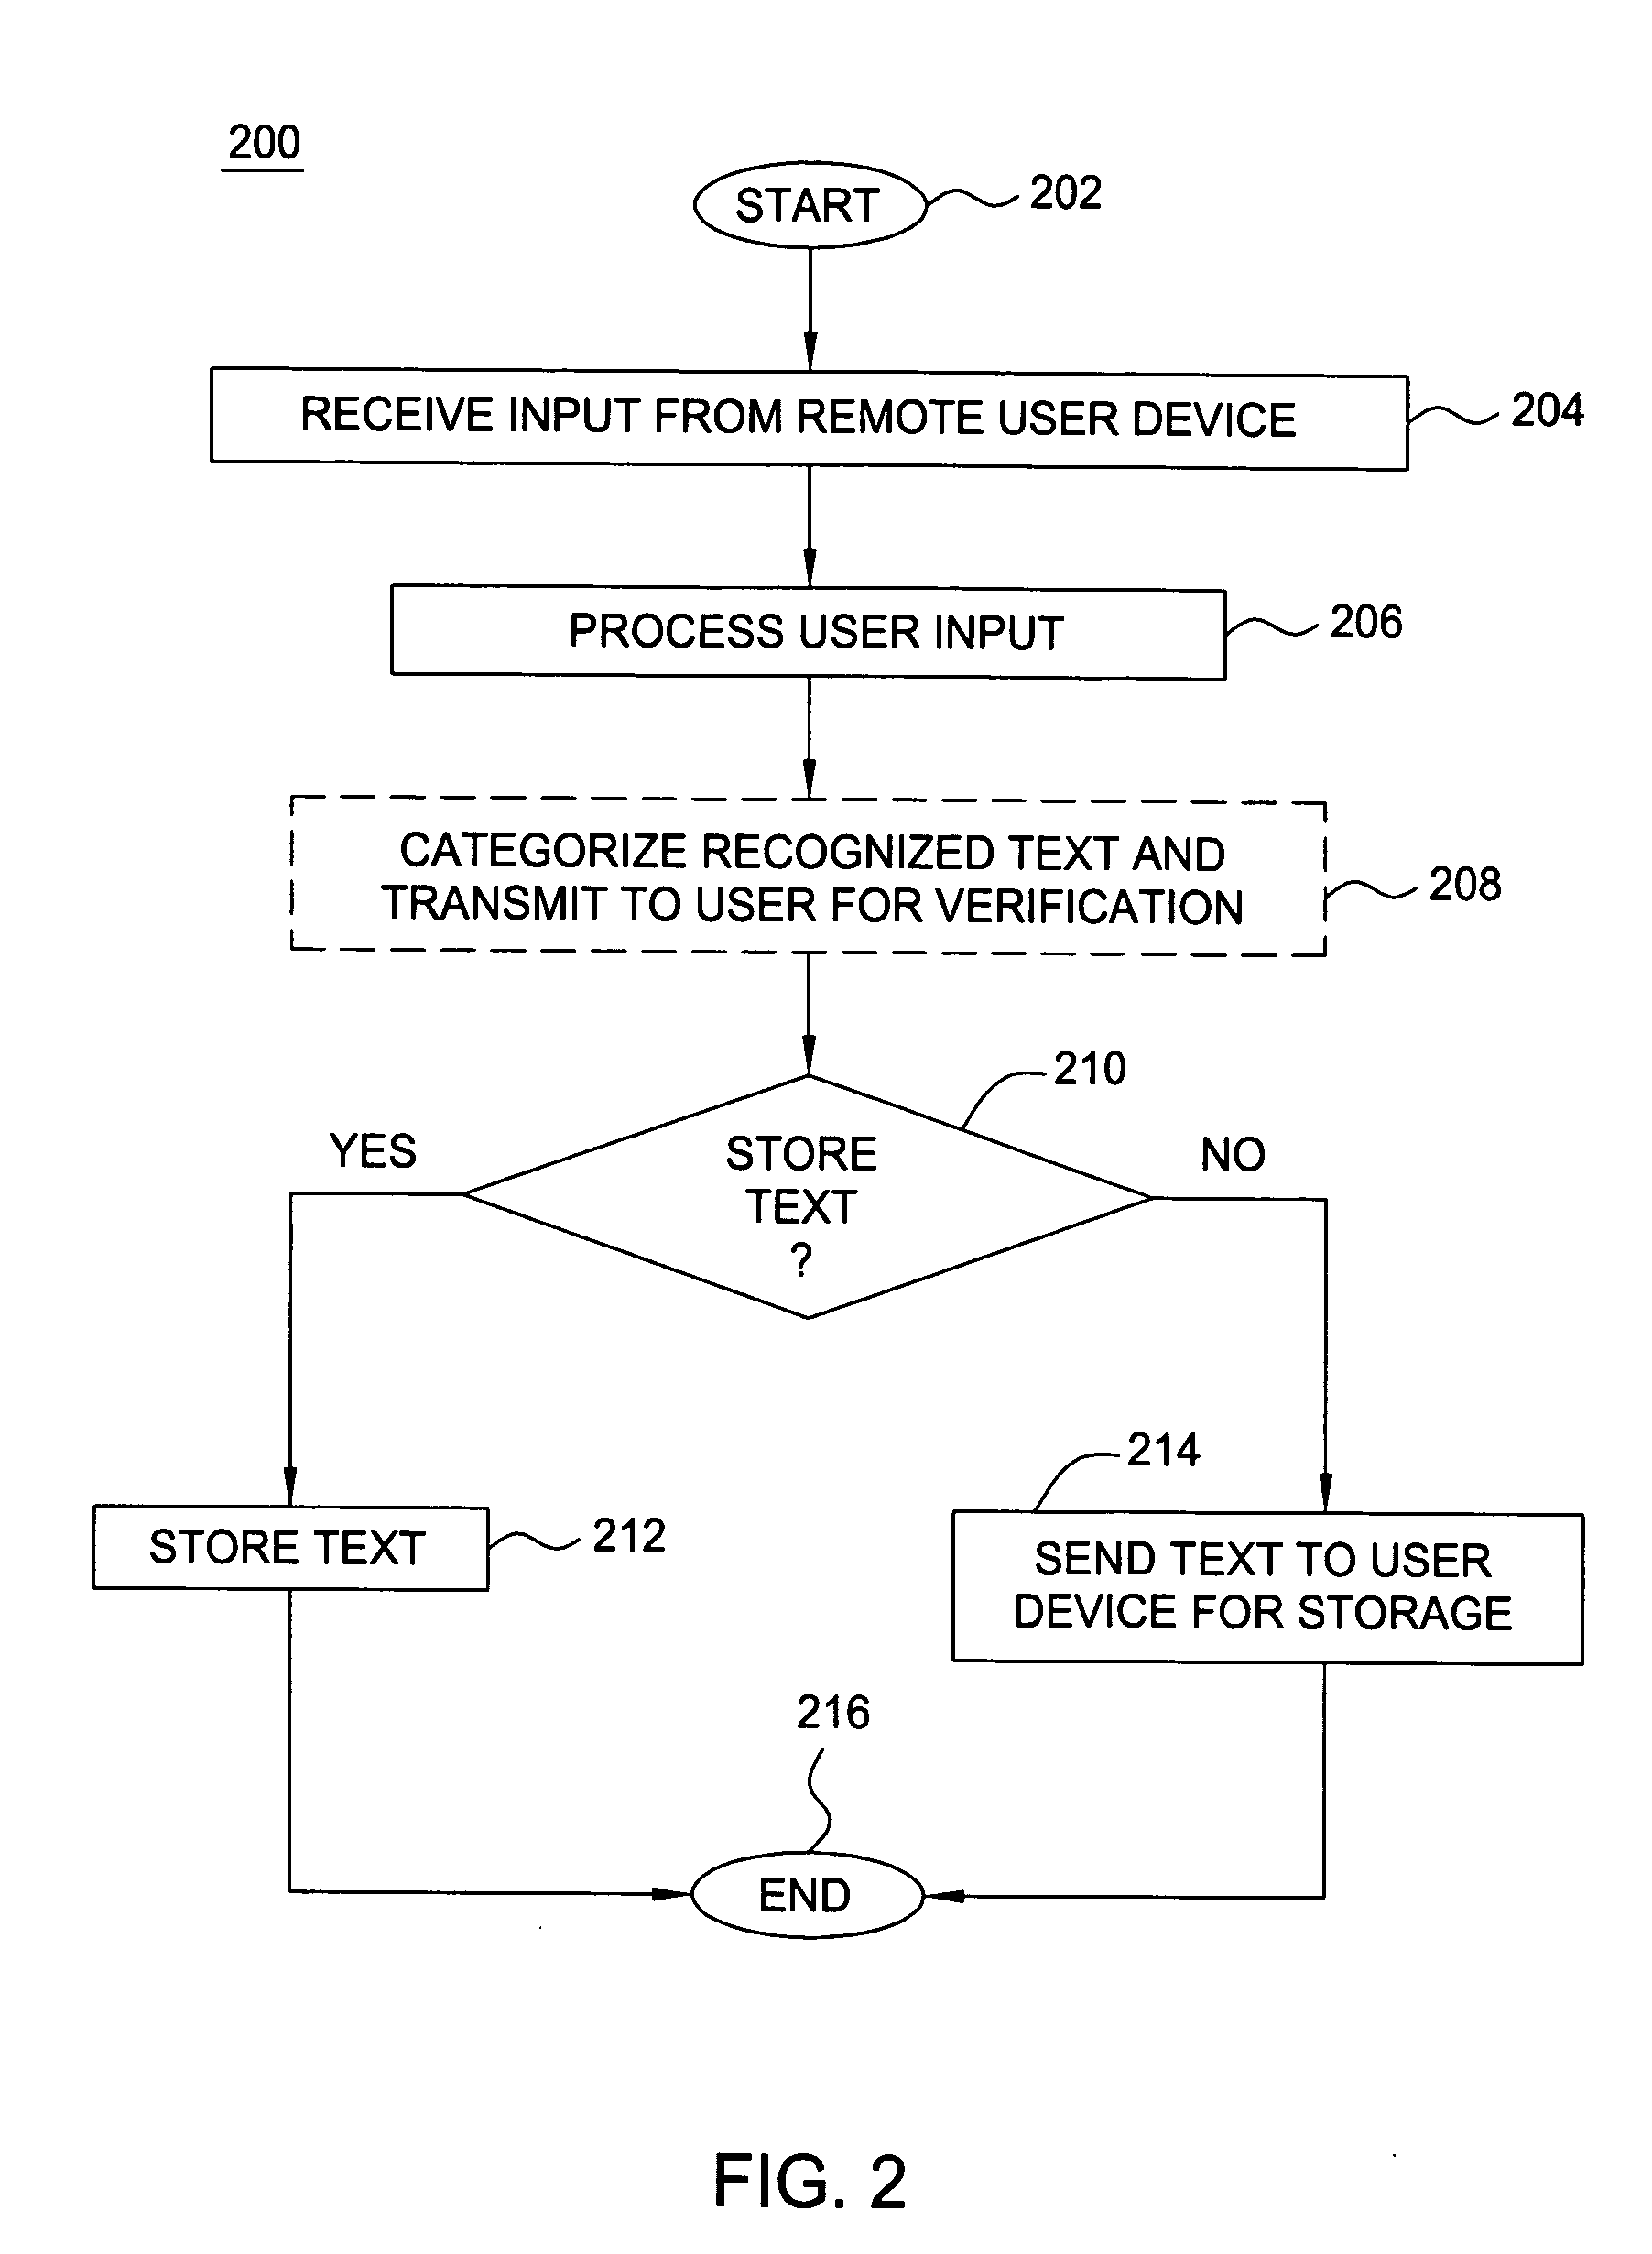 Method and apparatus for capturing paper-based information on a mobile computing device